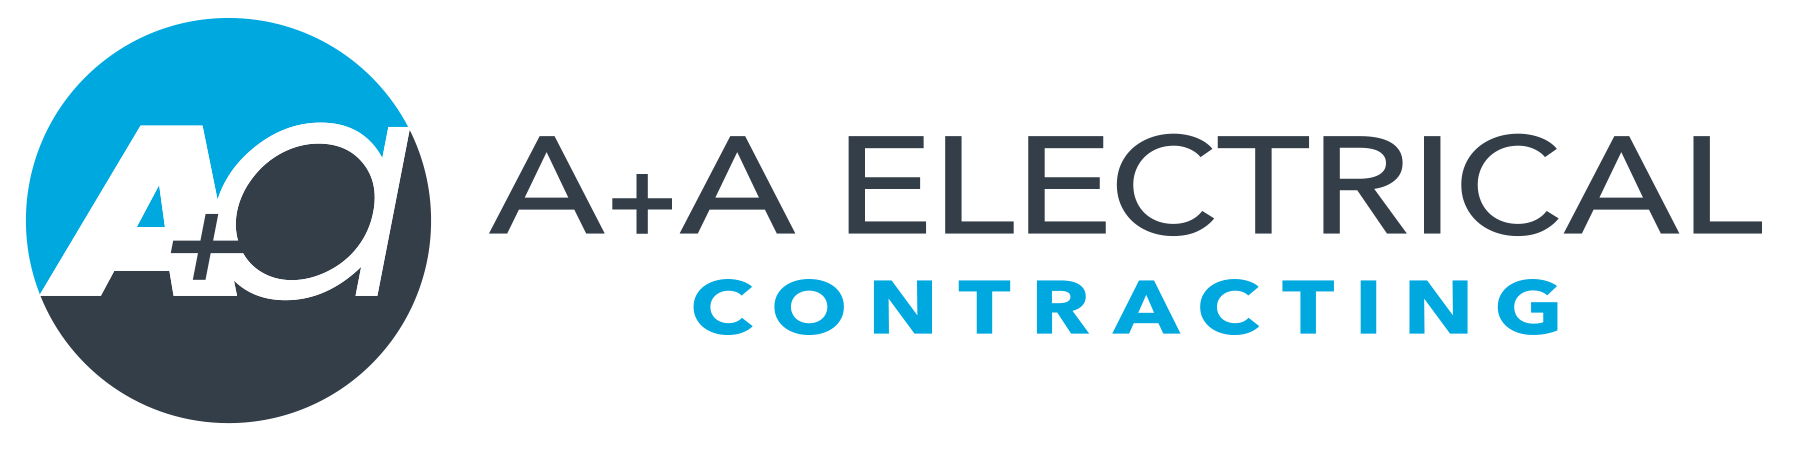 A+A Electrical Contracting LTD.